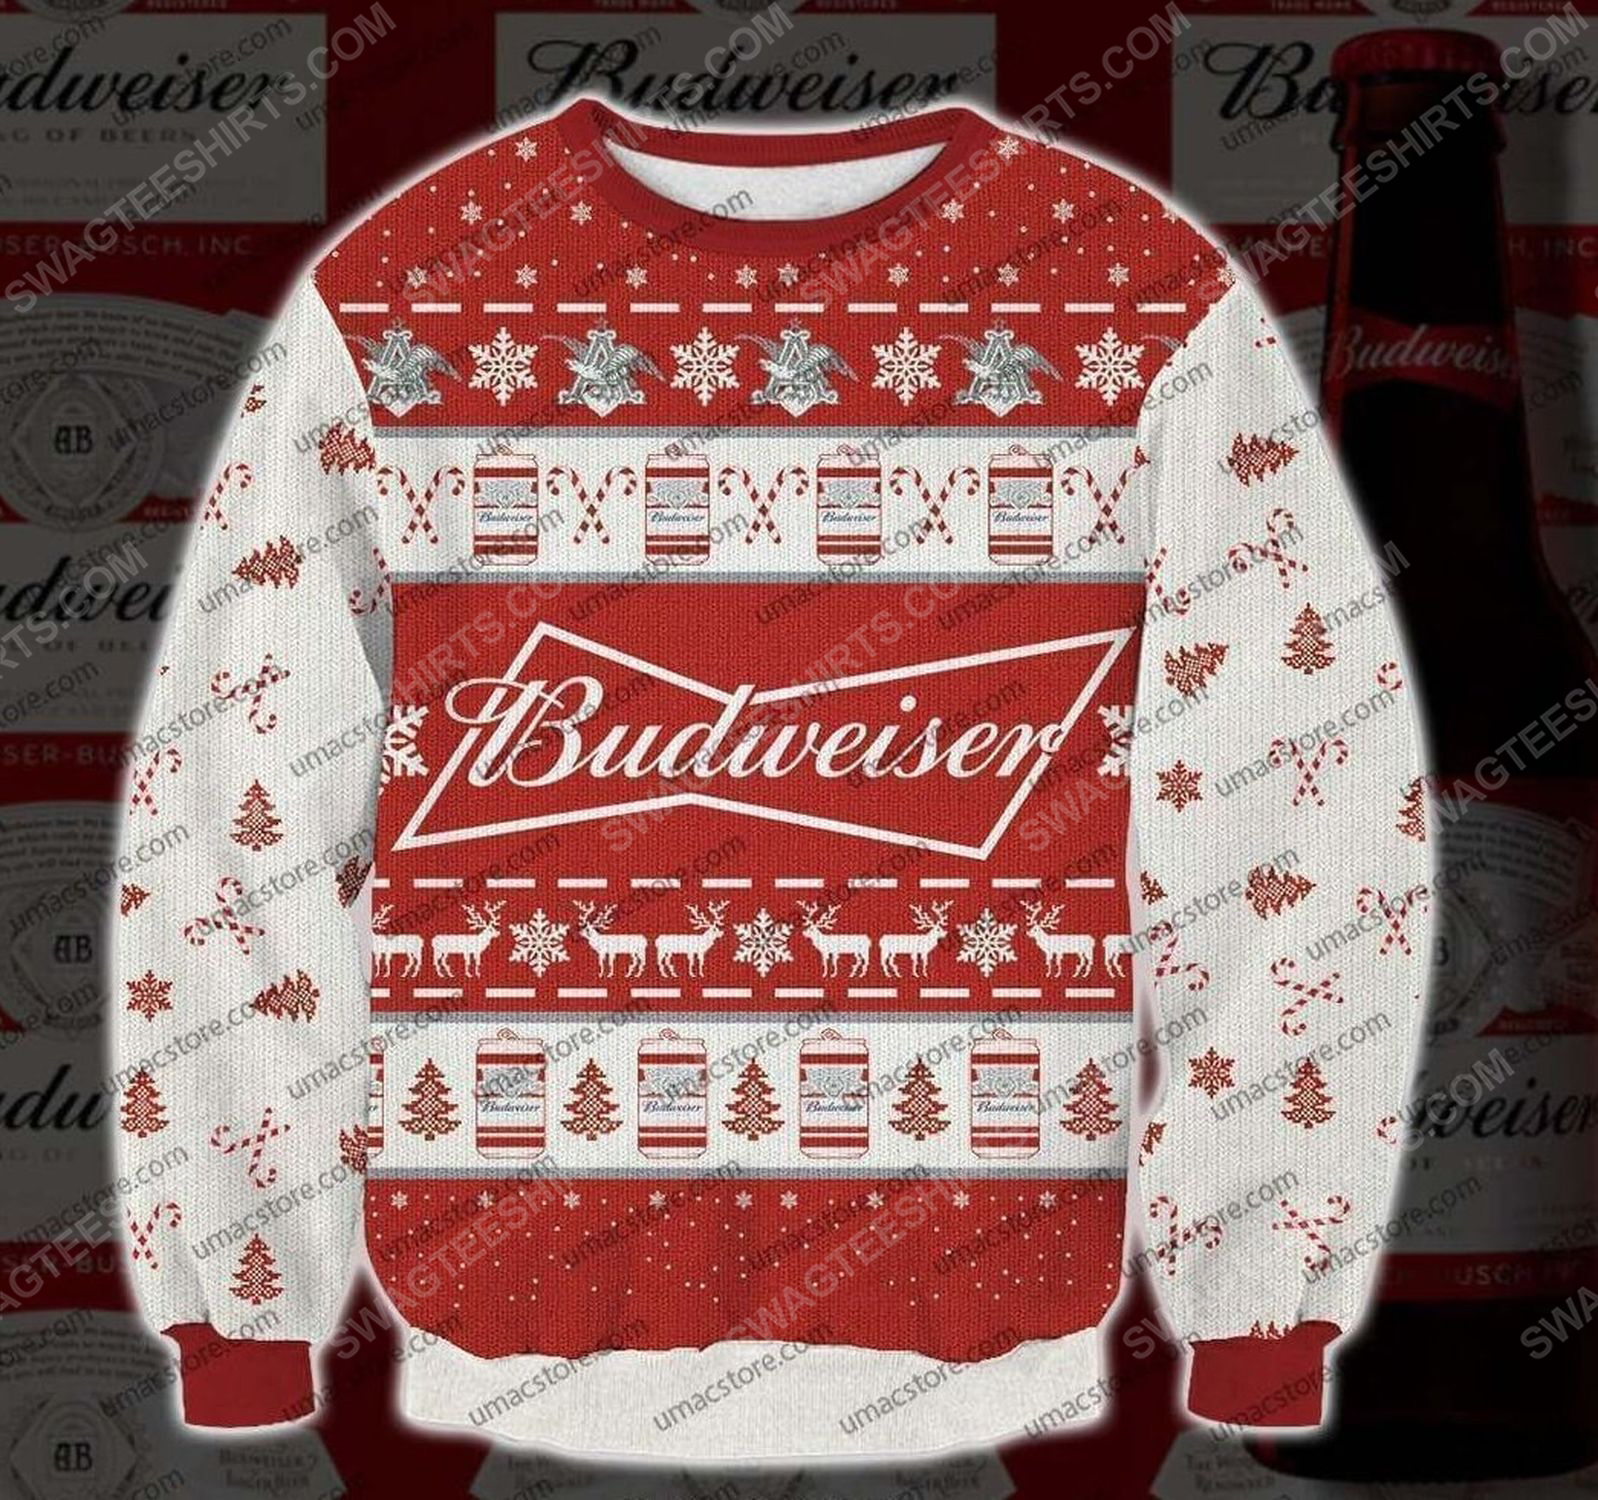 [special edition] Budweiser beer all over print ugly christmas sweater – maria